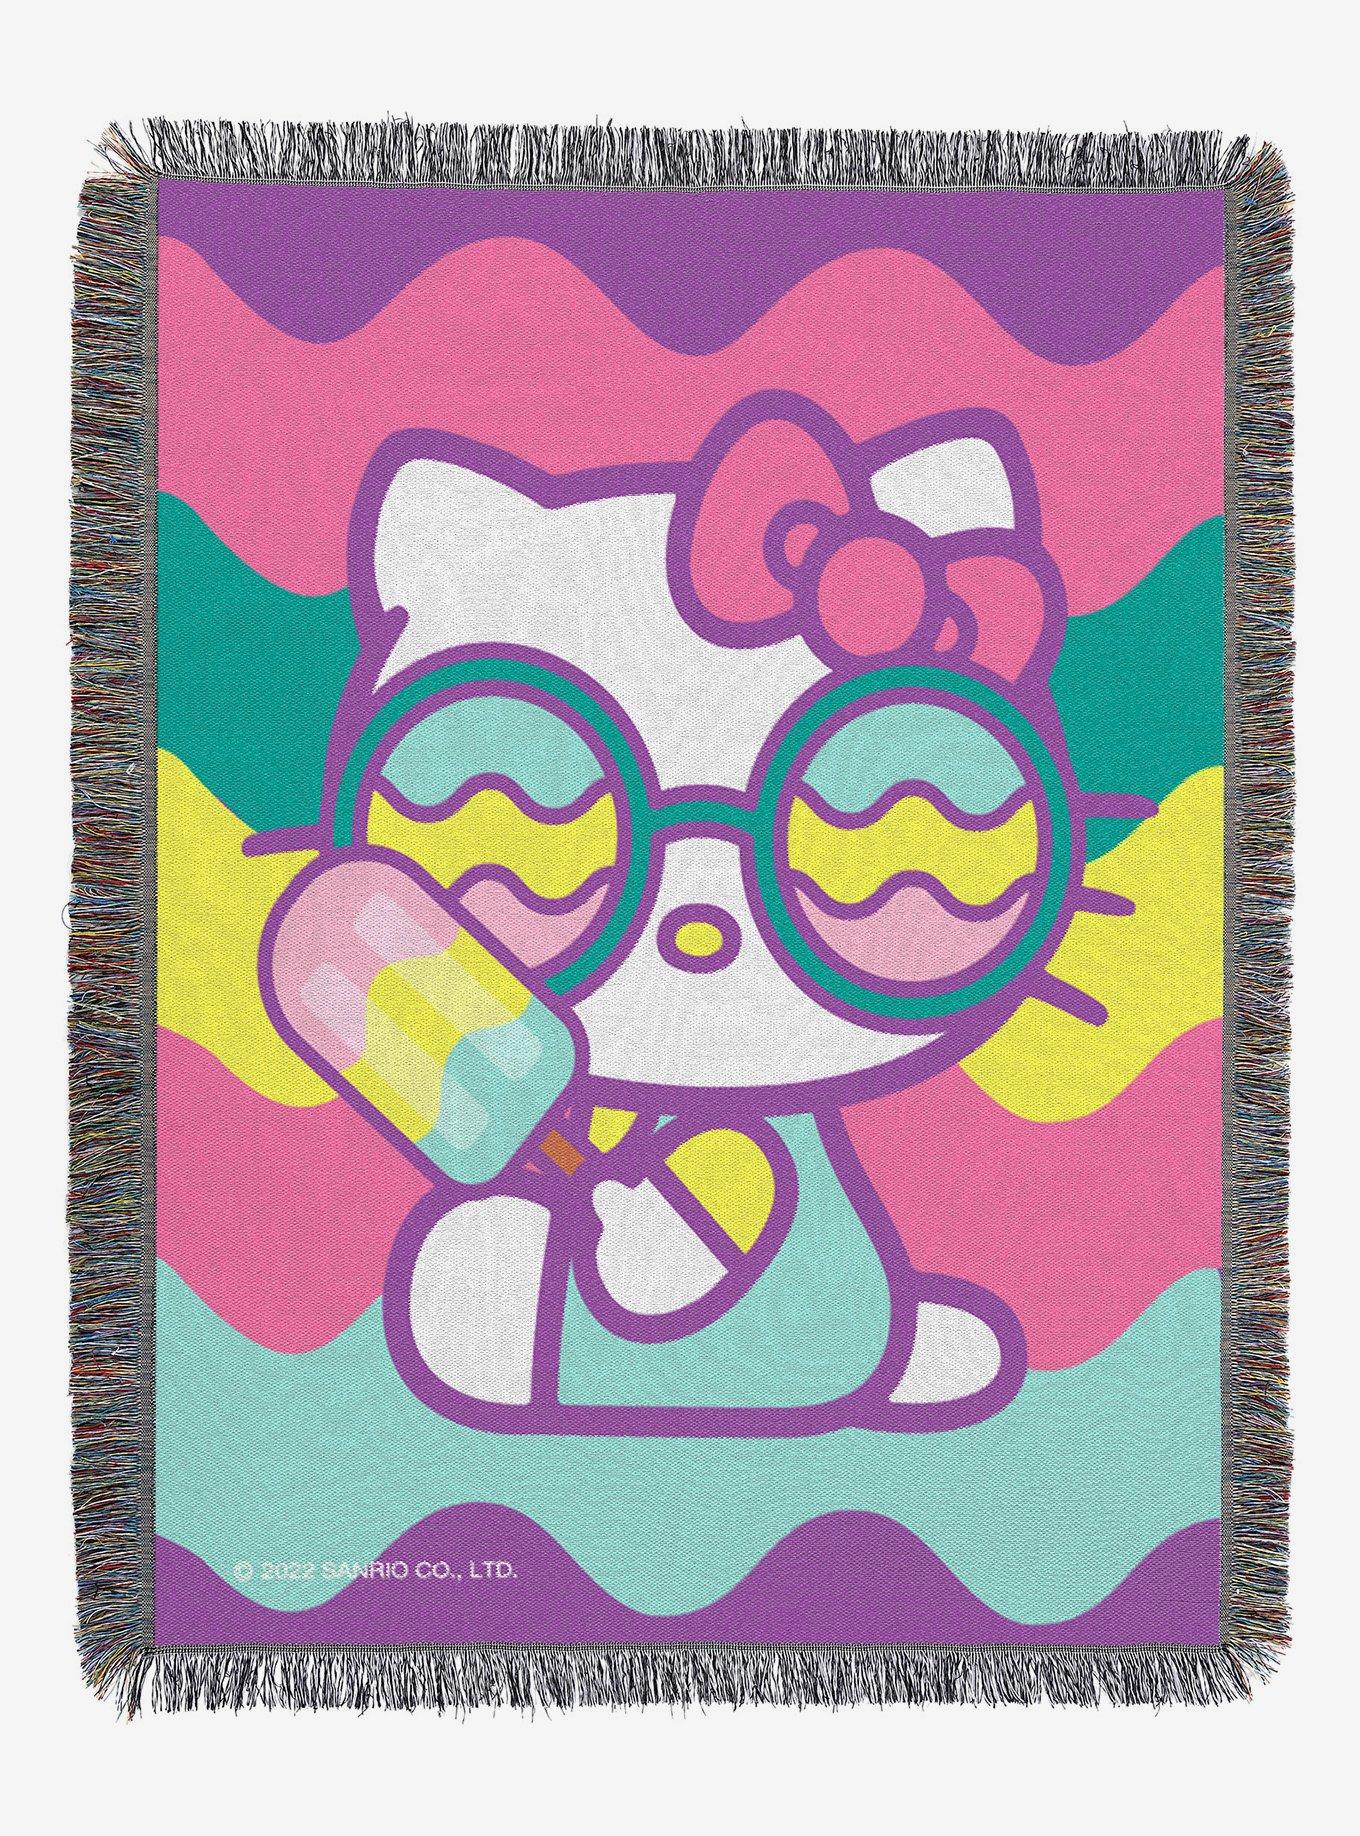 Hello Kitty Cool Kitty Woven Tapestry Throw Blanket